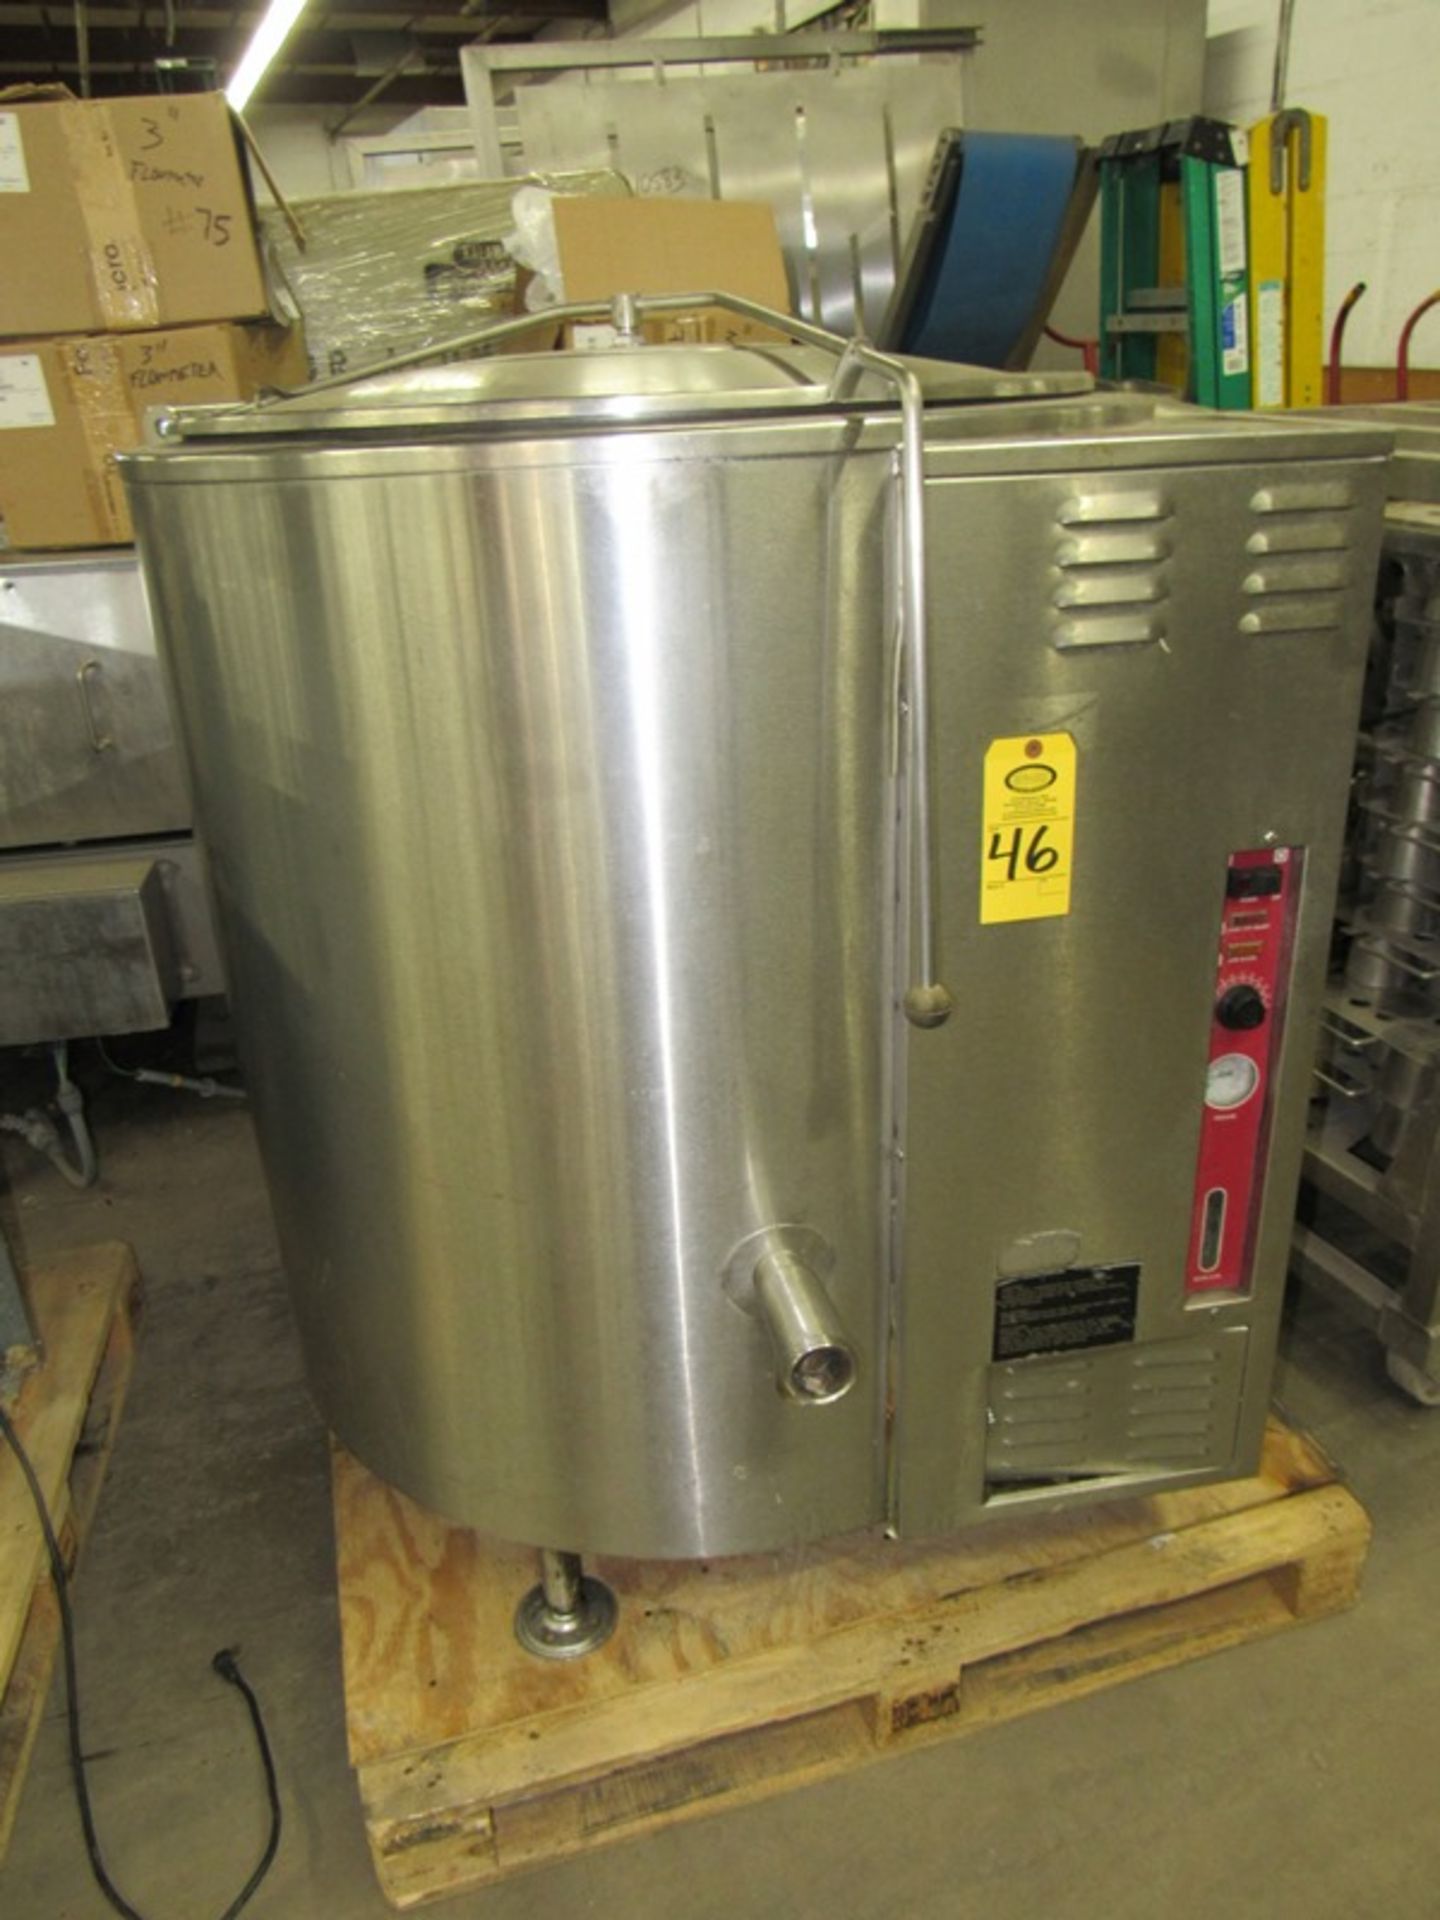 KLS-100 S.S. Gas Fired Self-Contained Kettle, Ser. #030911S5029-1174 ***All Monies must be received